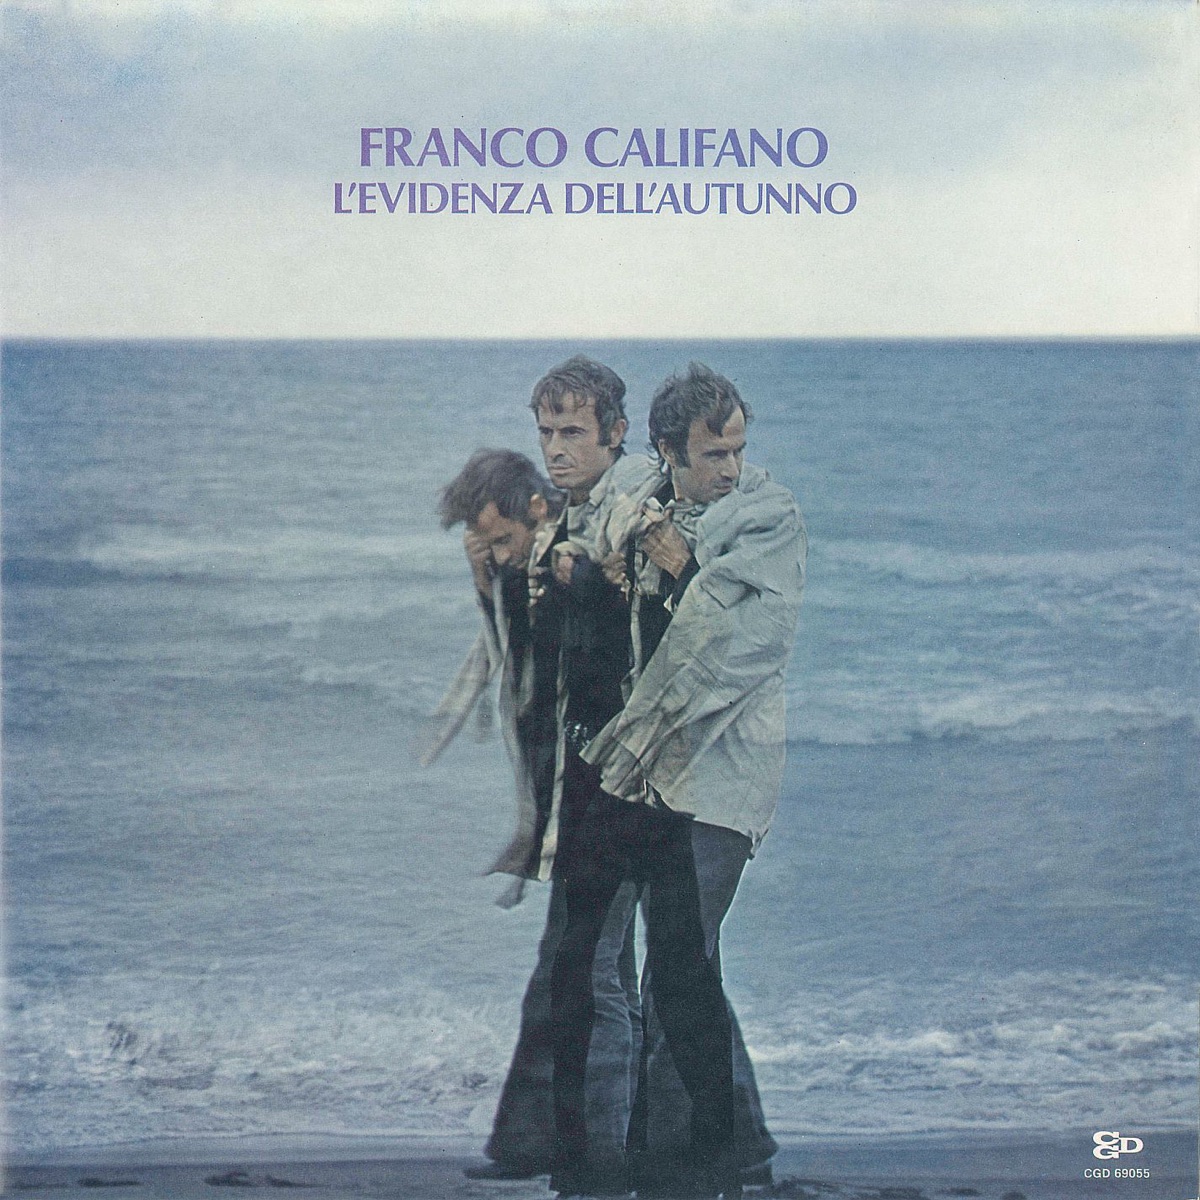 L'Ultimo Amico by Franco Califano on Apple Music